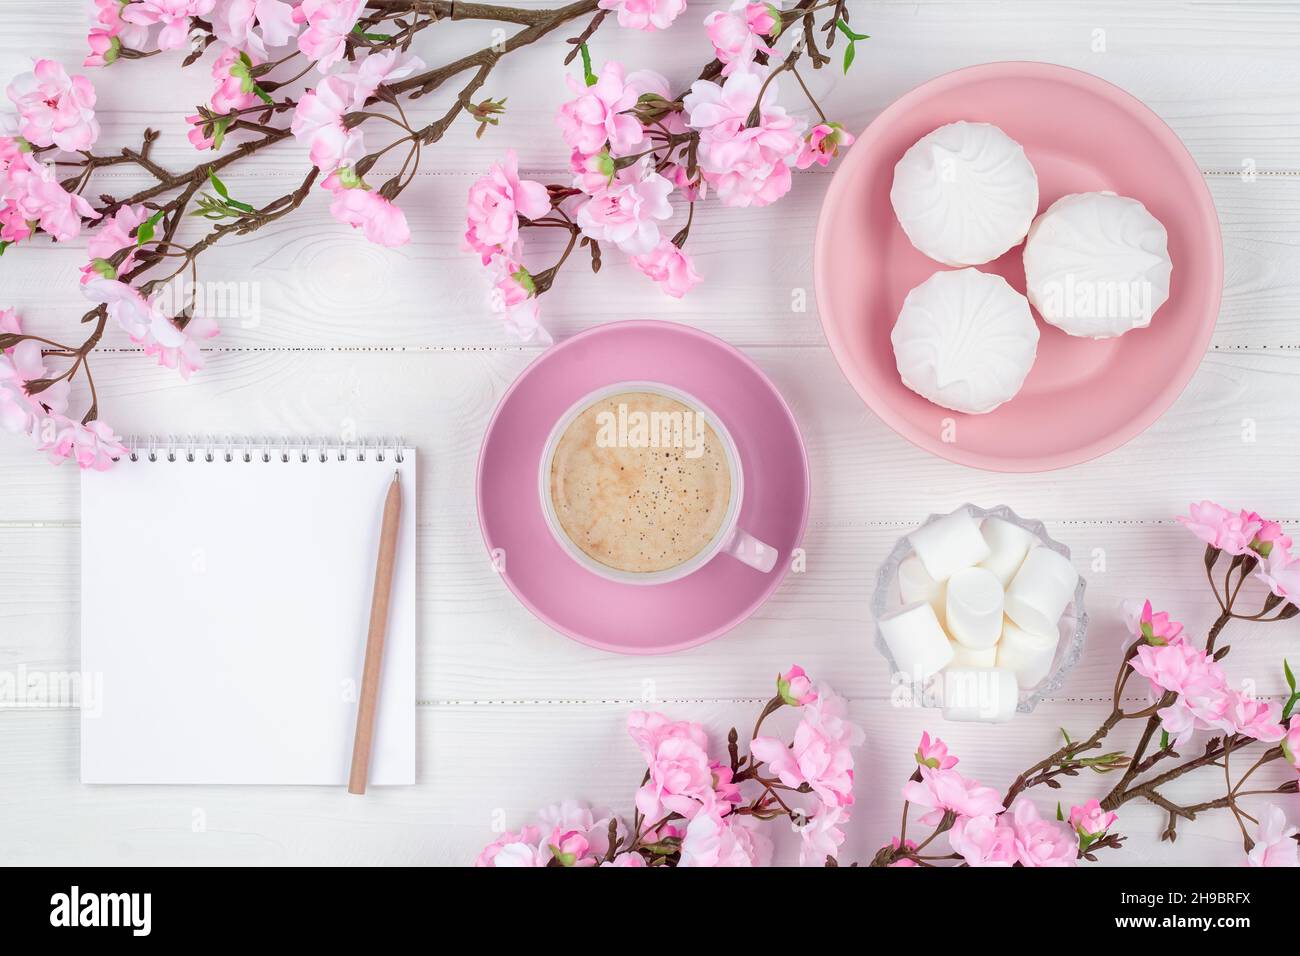 Coffee cup with marshmallow in the morning for breakfast. Blank notebook with pen. Diary, planning concept. Romantic spring mockup with copy space. Ch Stock Photo